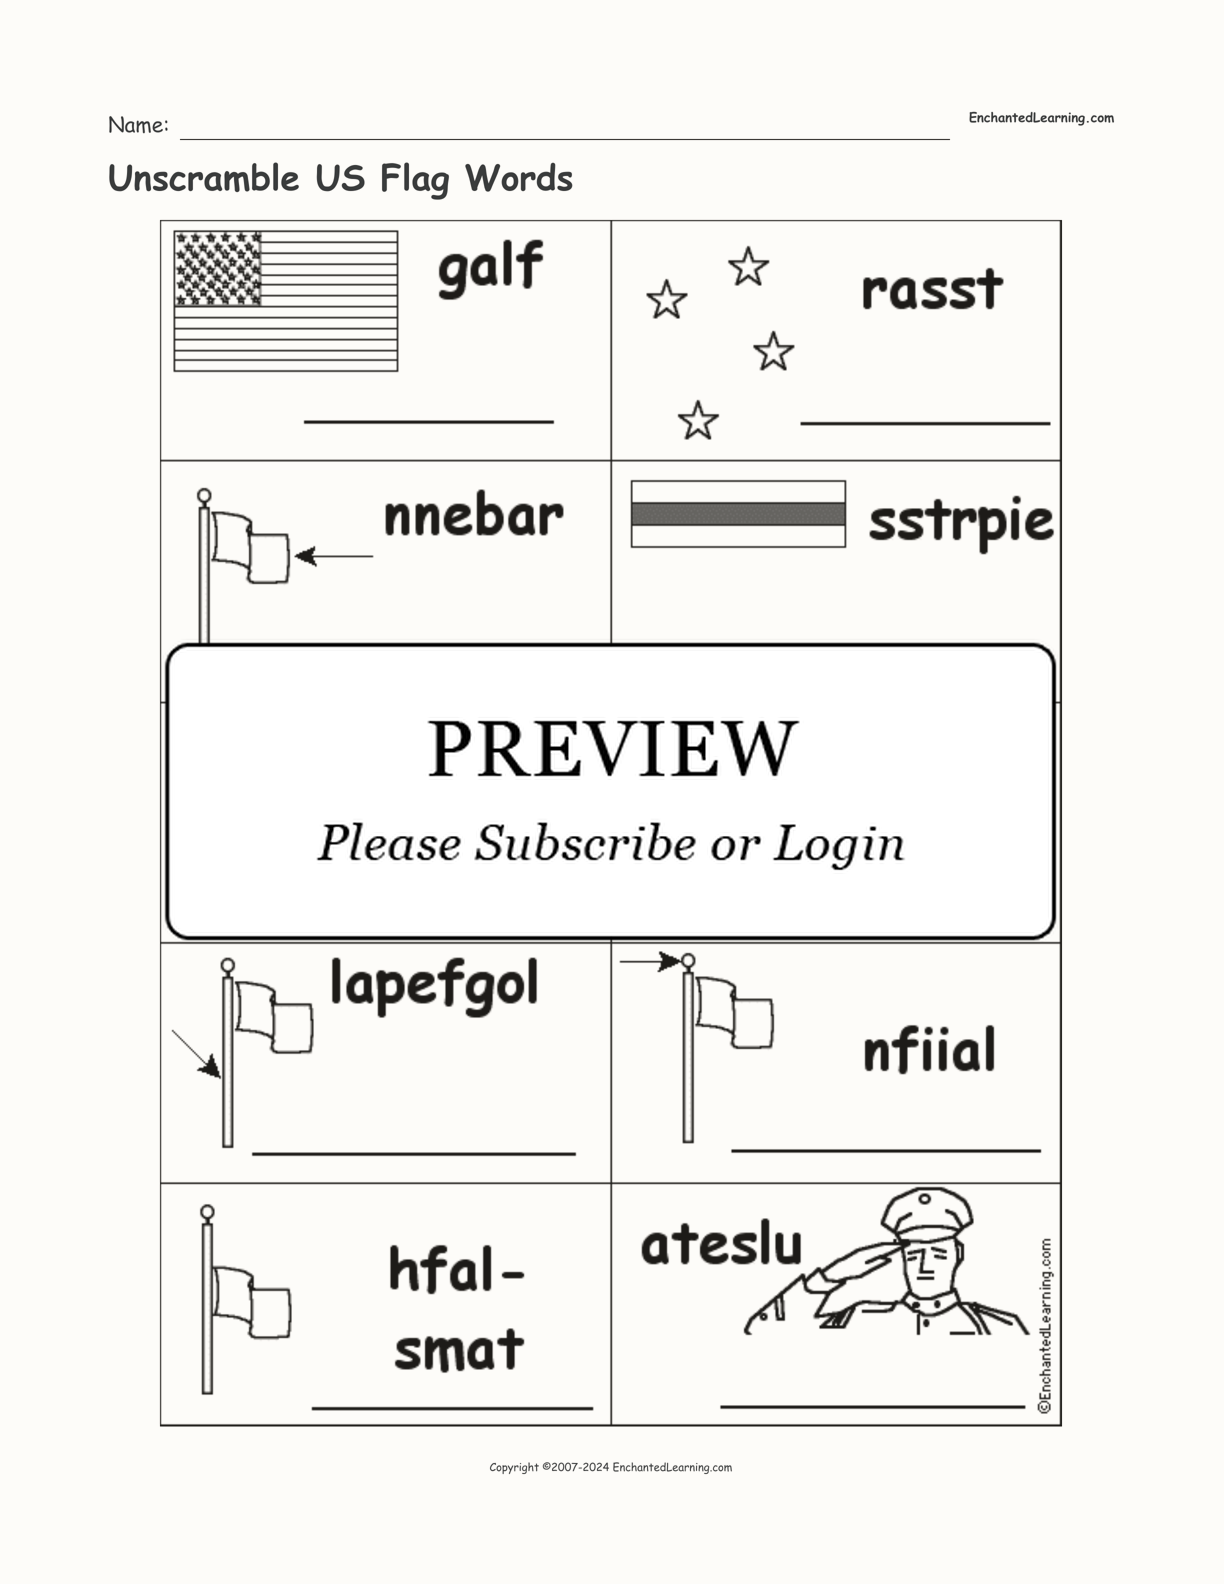 Unscramble US Flag Words interactive worksheet page 1